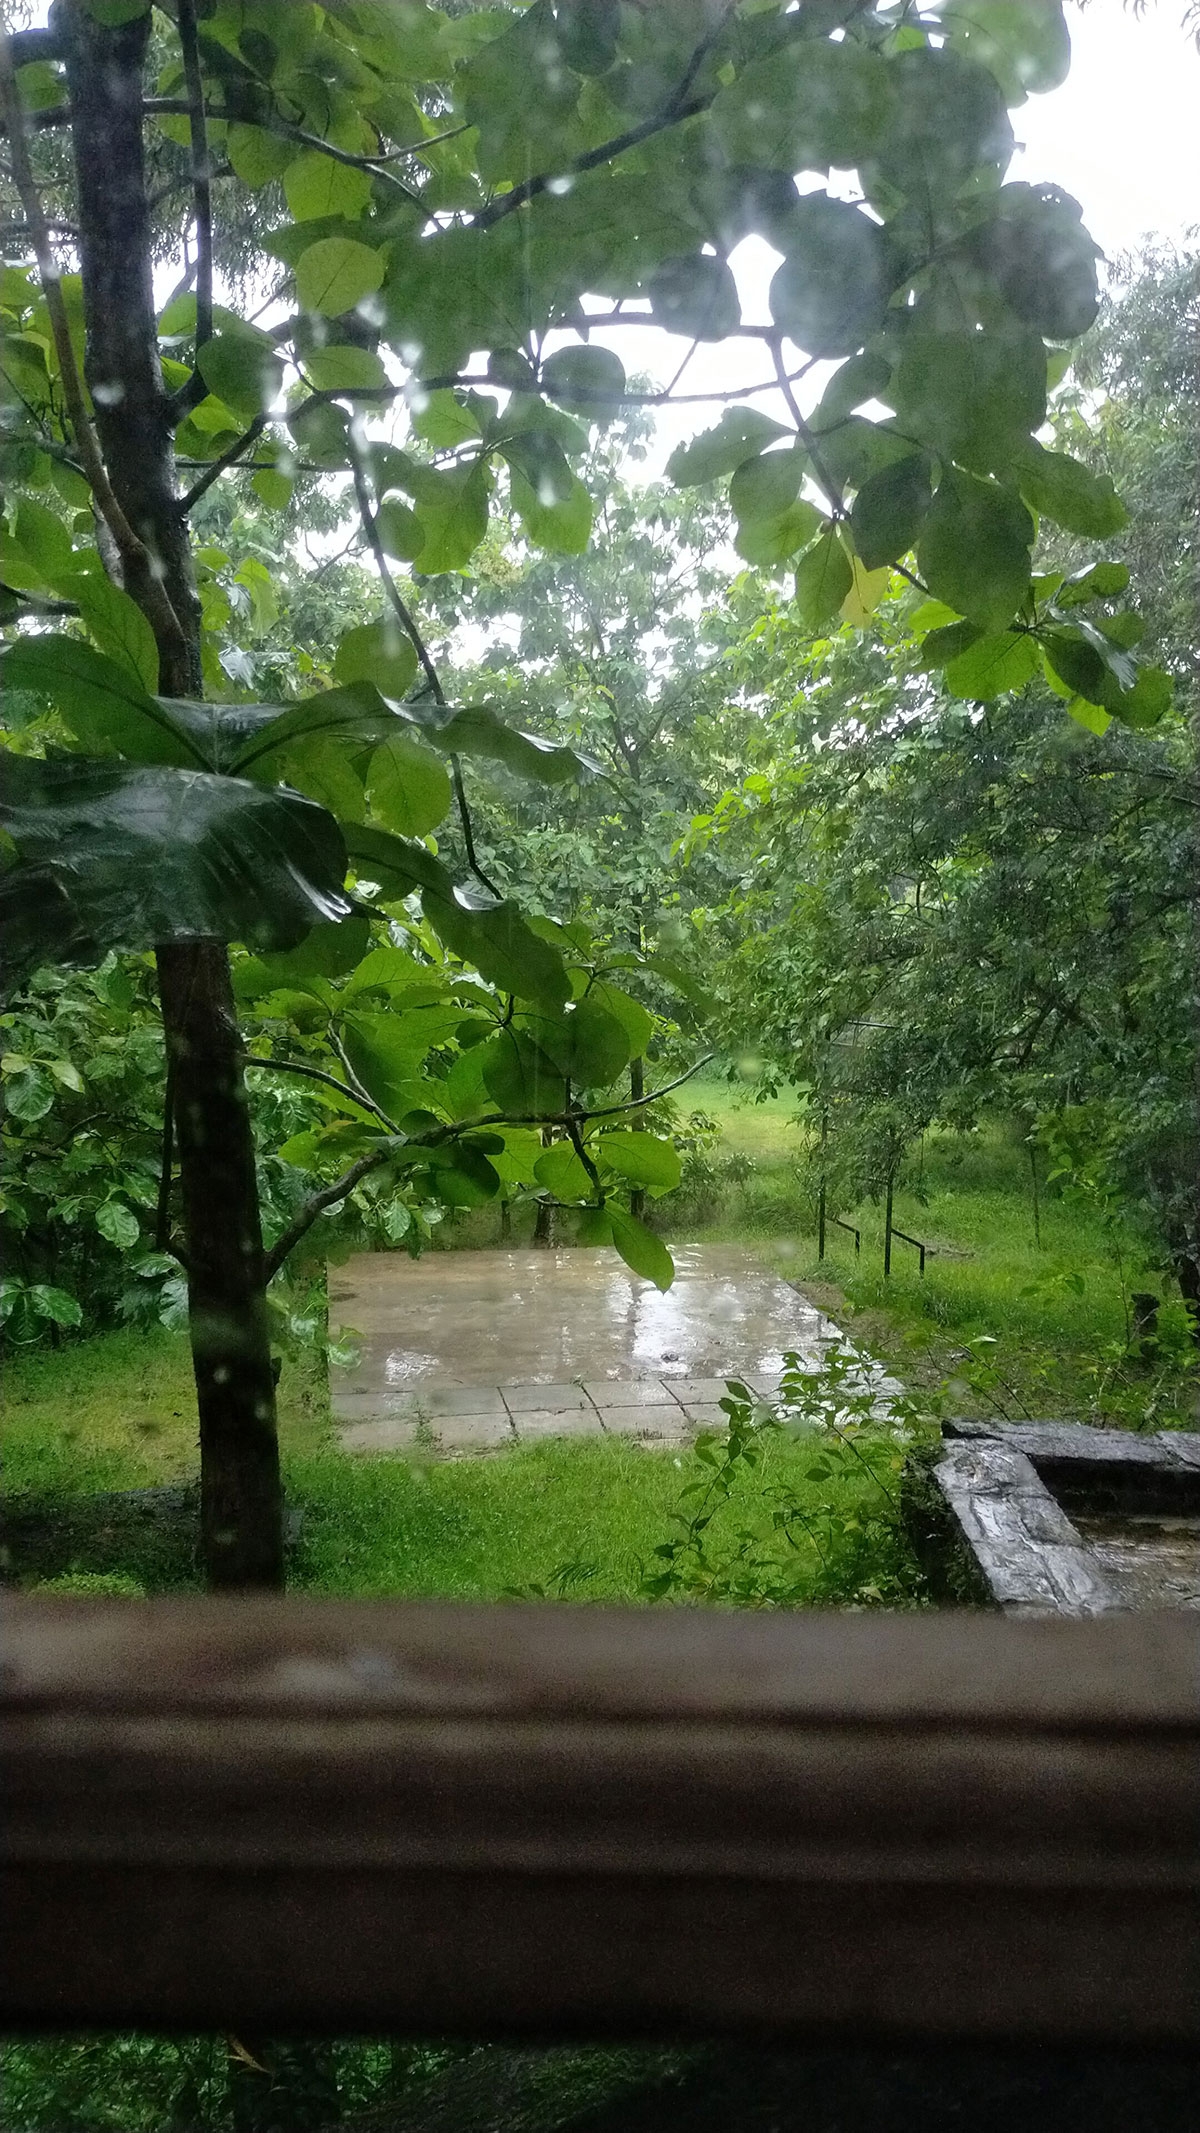 A photo taken through a window, looking out into a lush green environment. There are dozens of trees with broad, bright green leaves. It appears to have rained recently, as the ground and vegetation is wet.